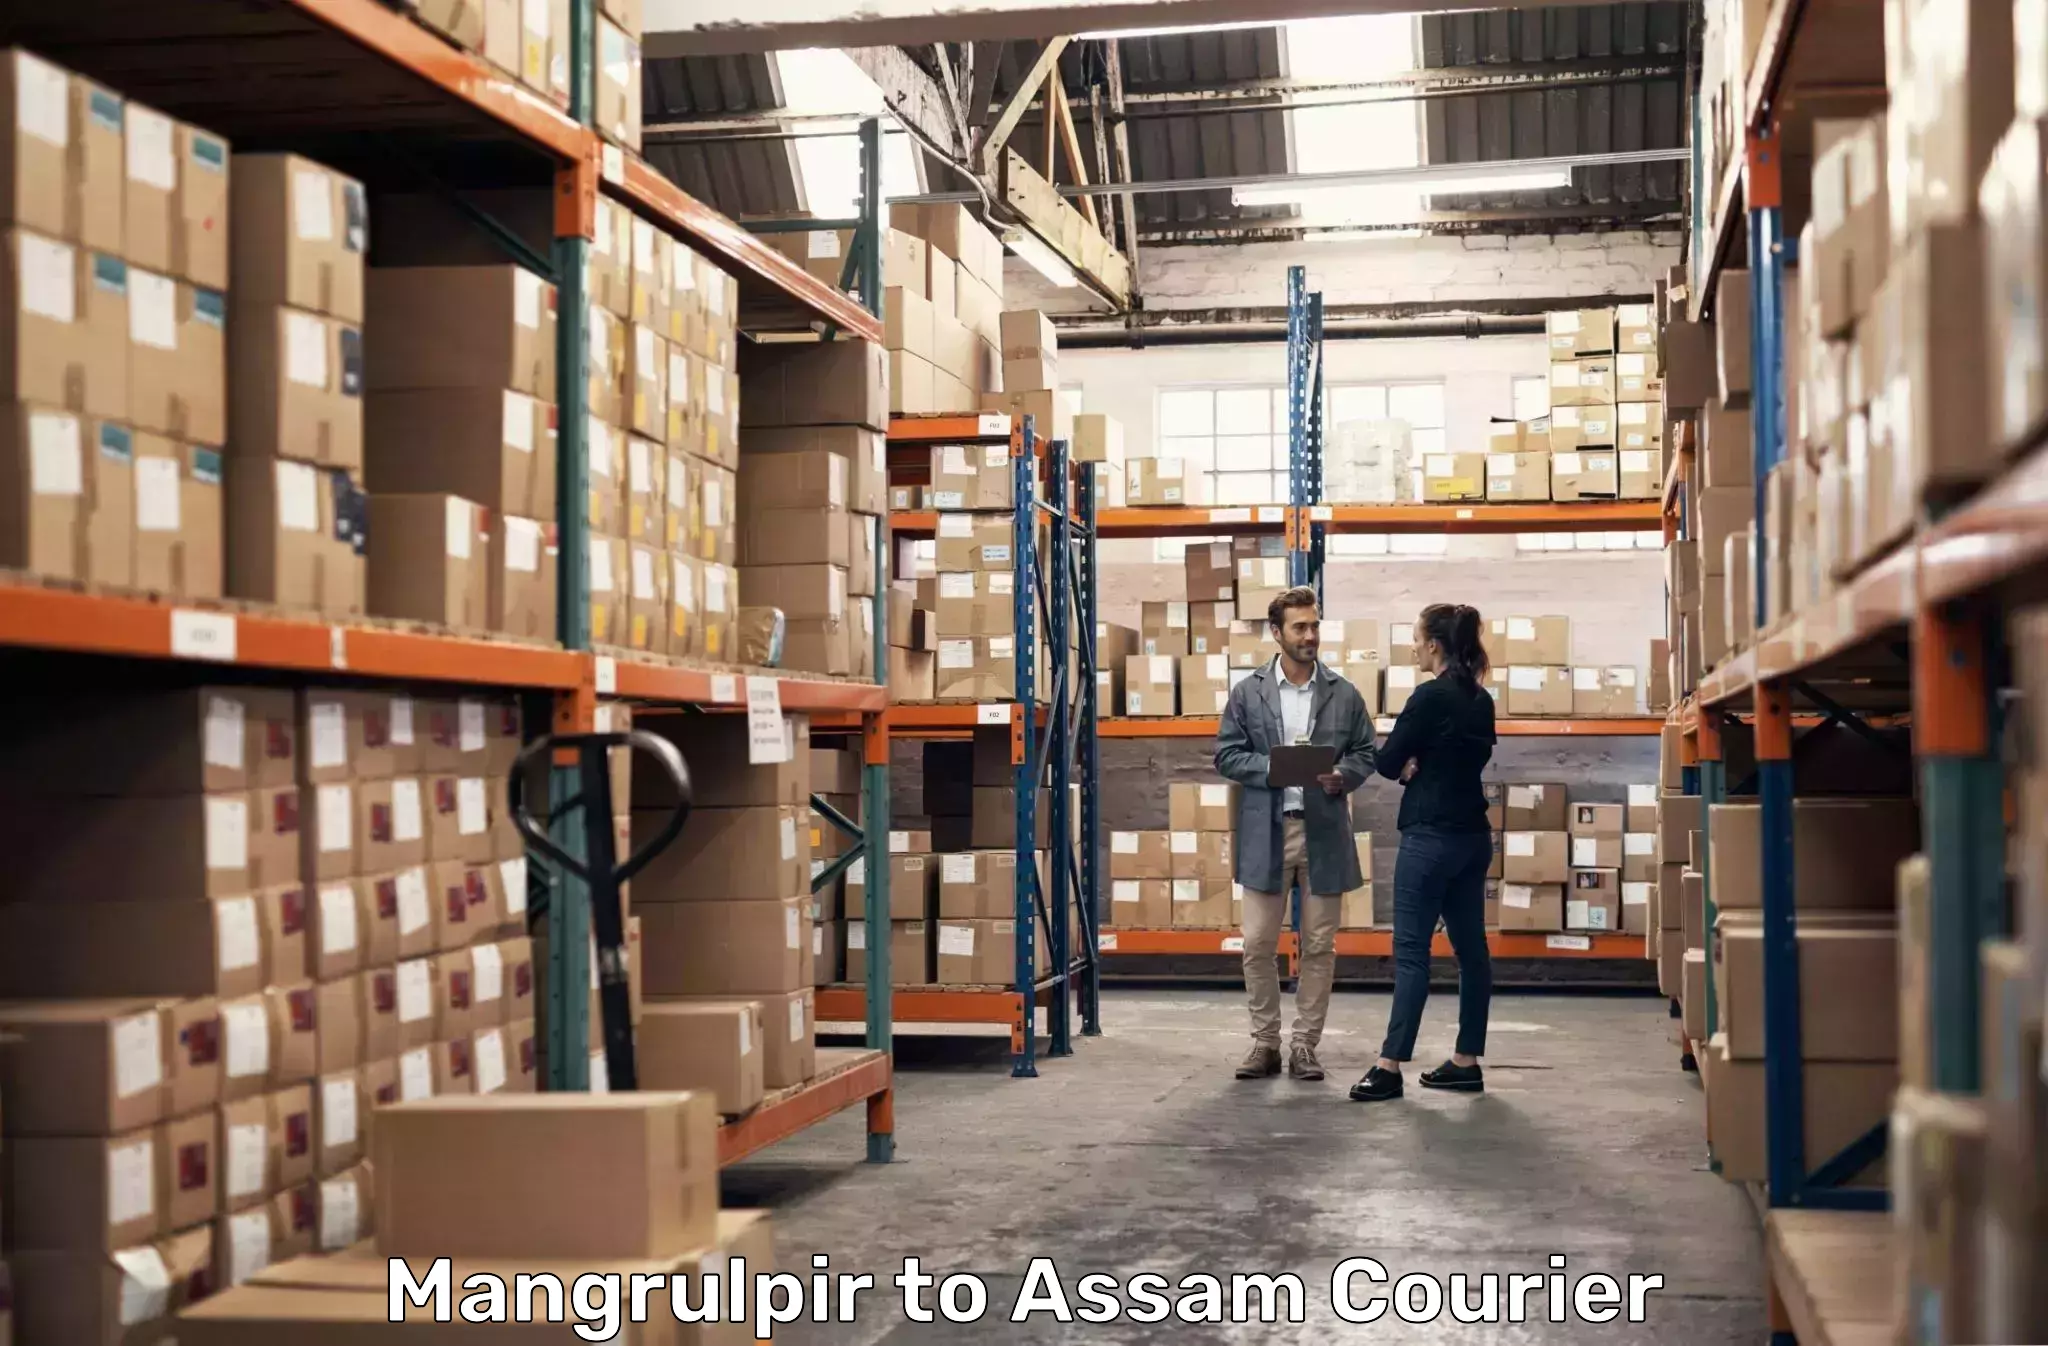 Optimized shipping routes in Mangrulpir to Assam